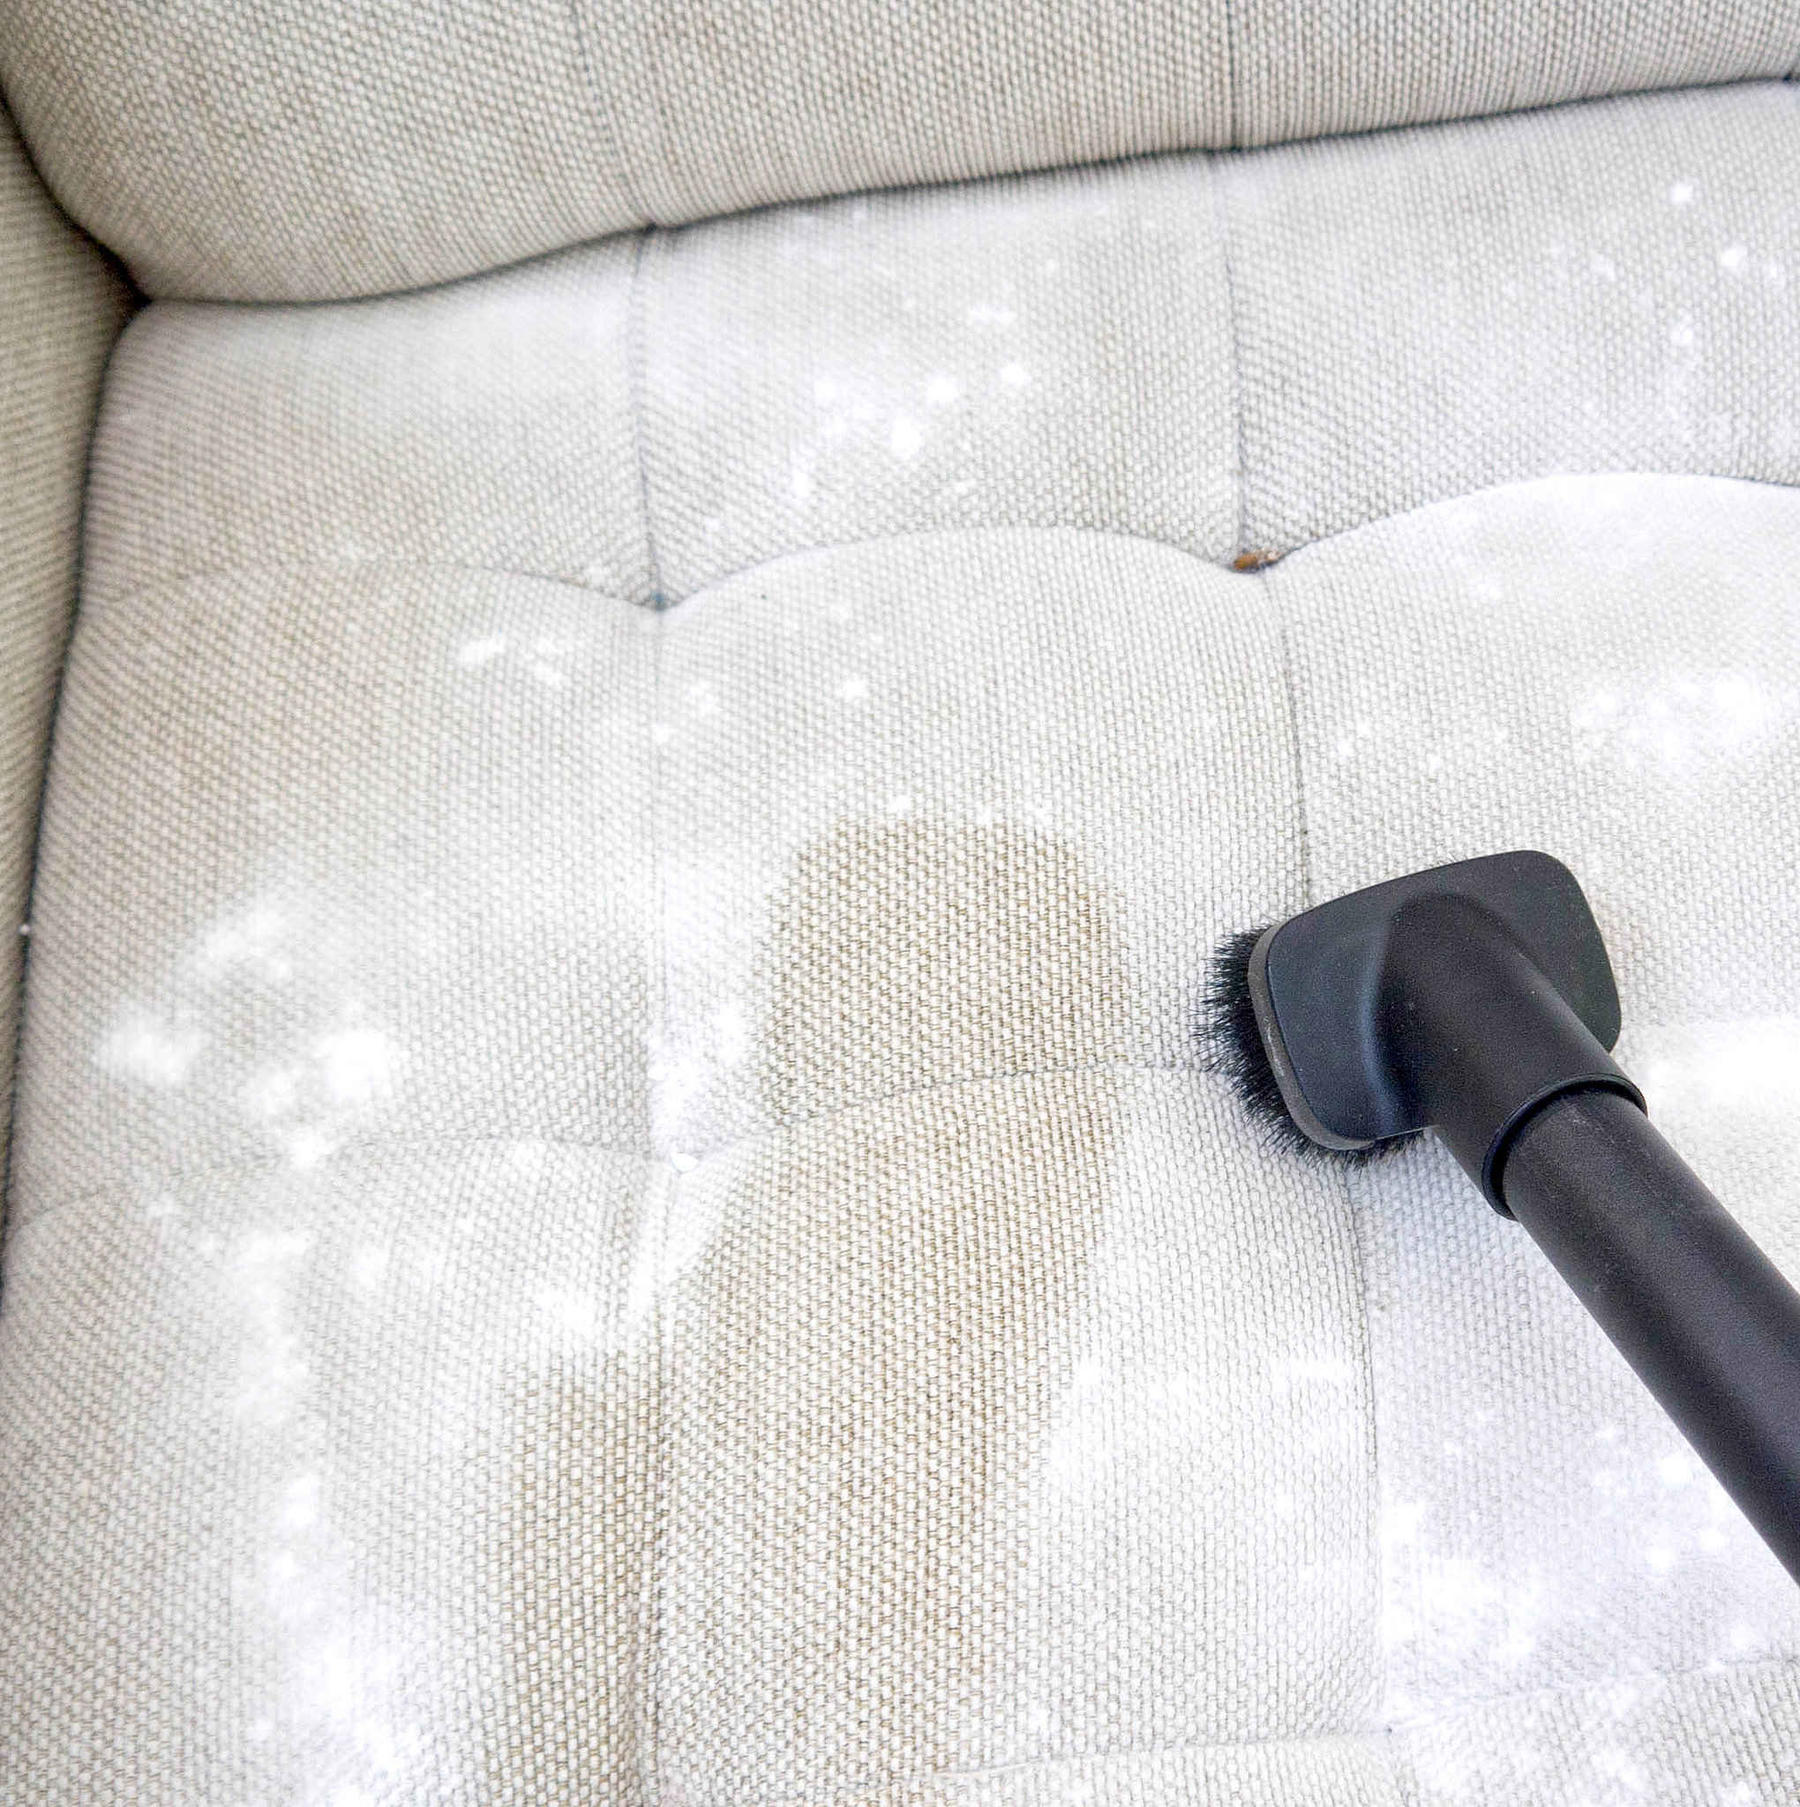 cleaning sofa cover